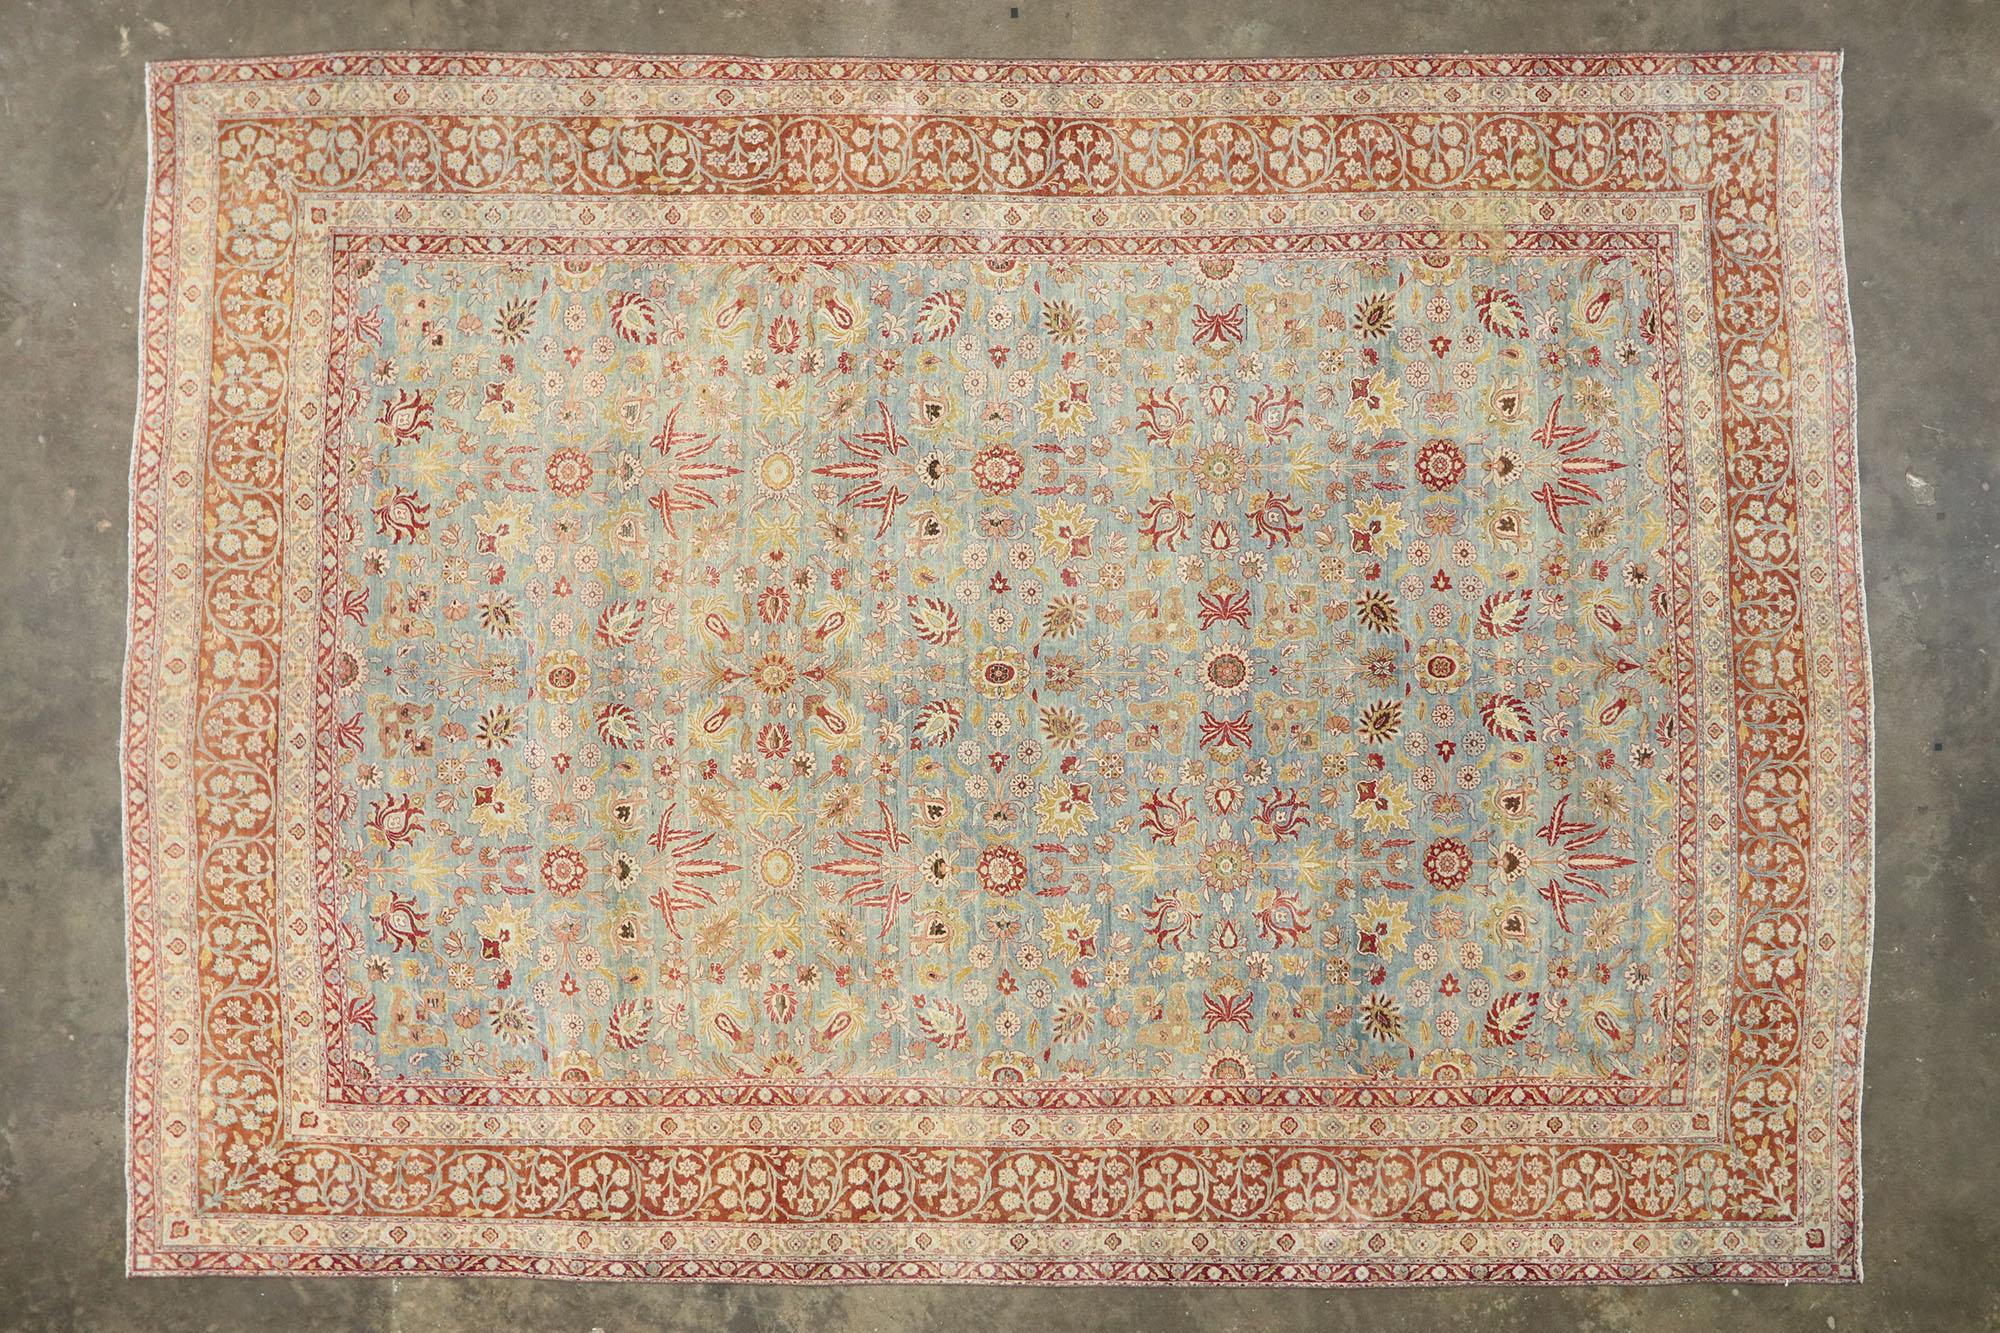 20th Century Distressed Antique Persian Kerman Rug with Southern Living and Colonial Style